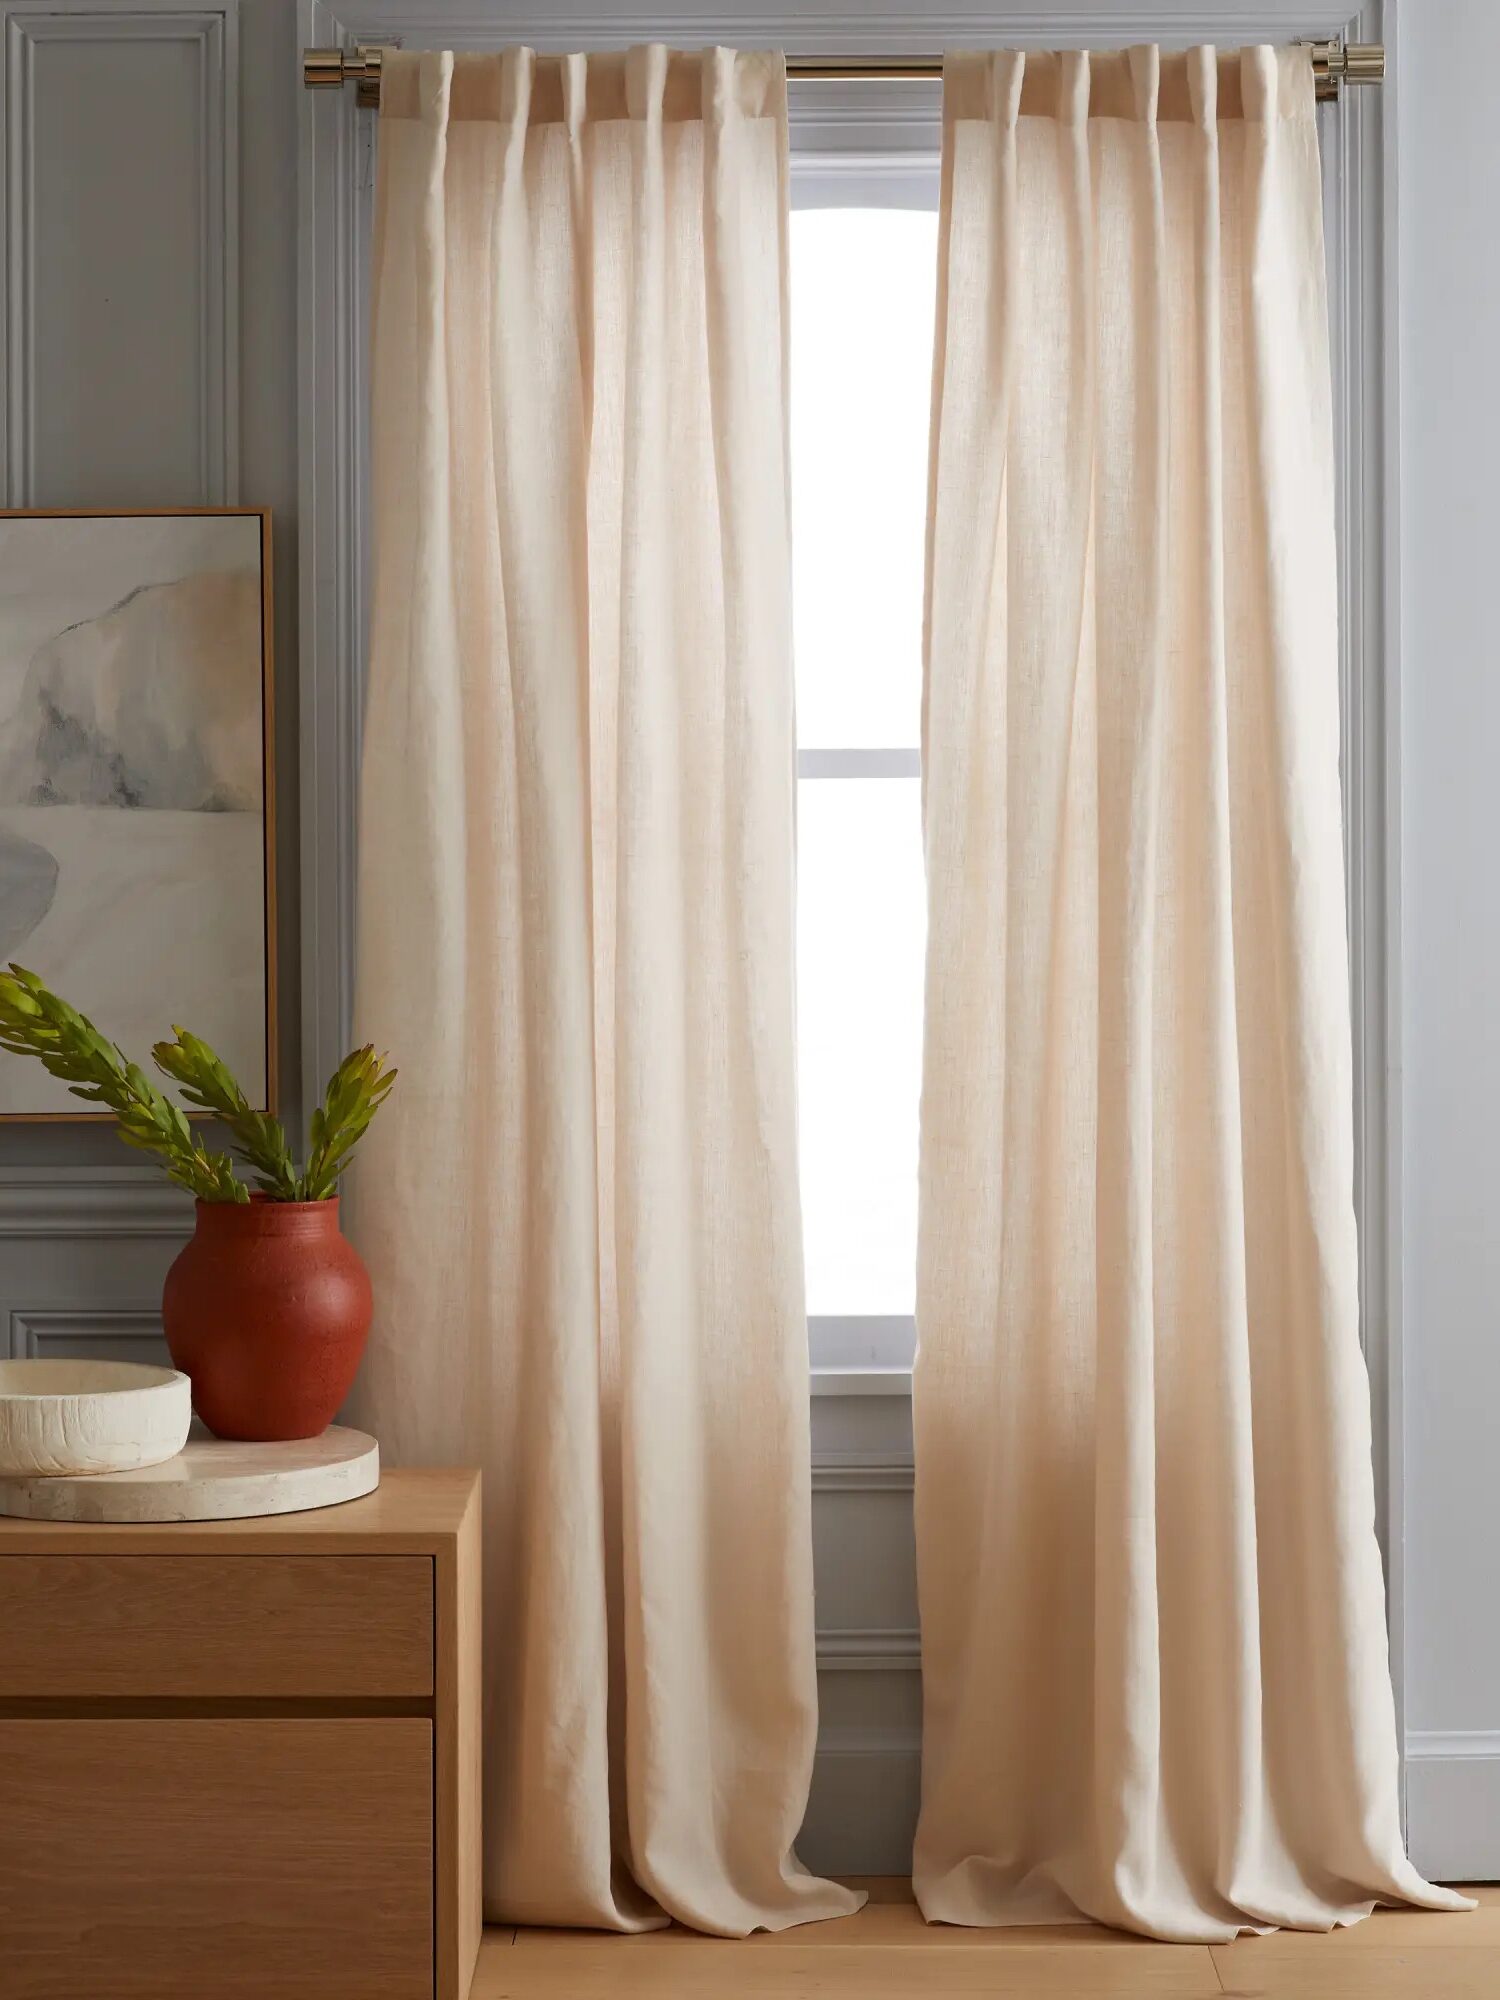 Long beige curtains hang from a rod by large window, with a wooden sideboard and a red vase with green plant on the left.